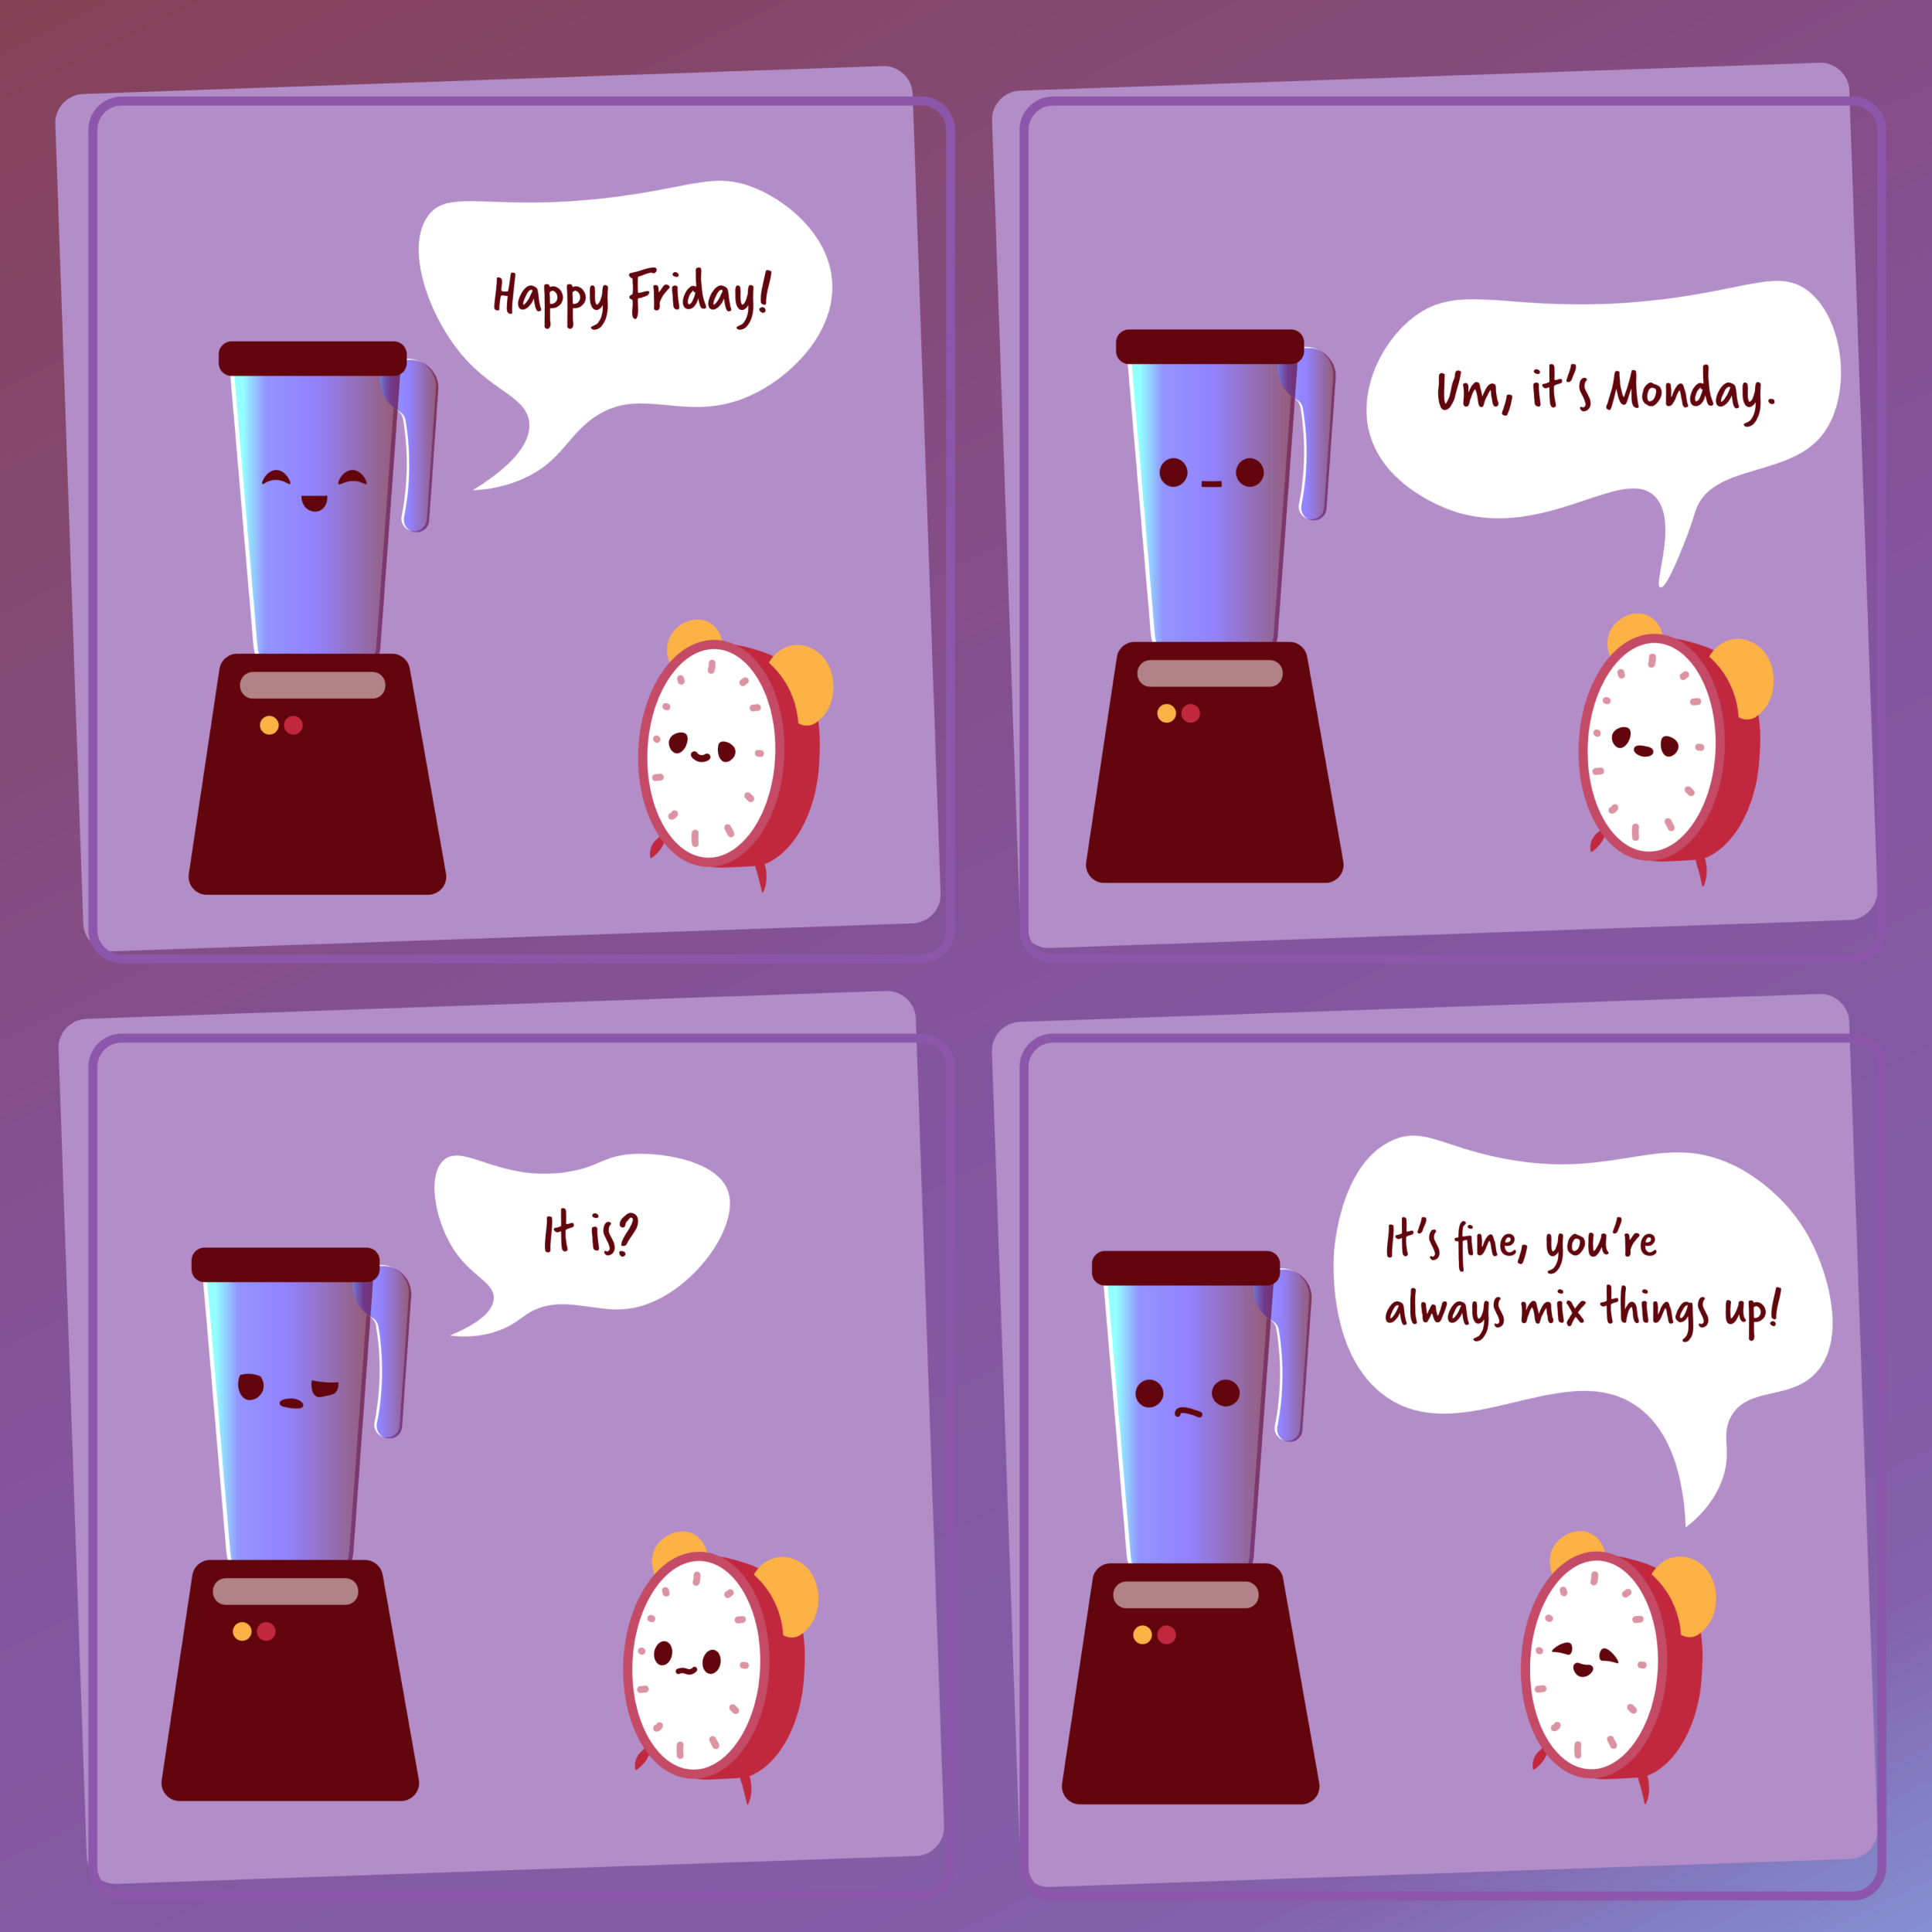 Comic of blender talking with alarm clock about mixing times up